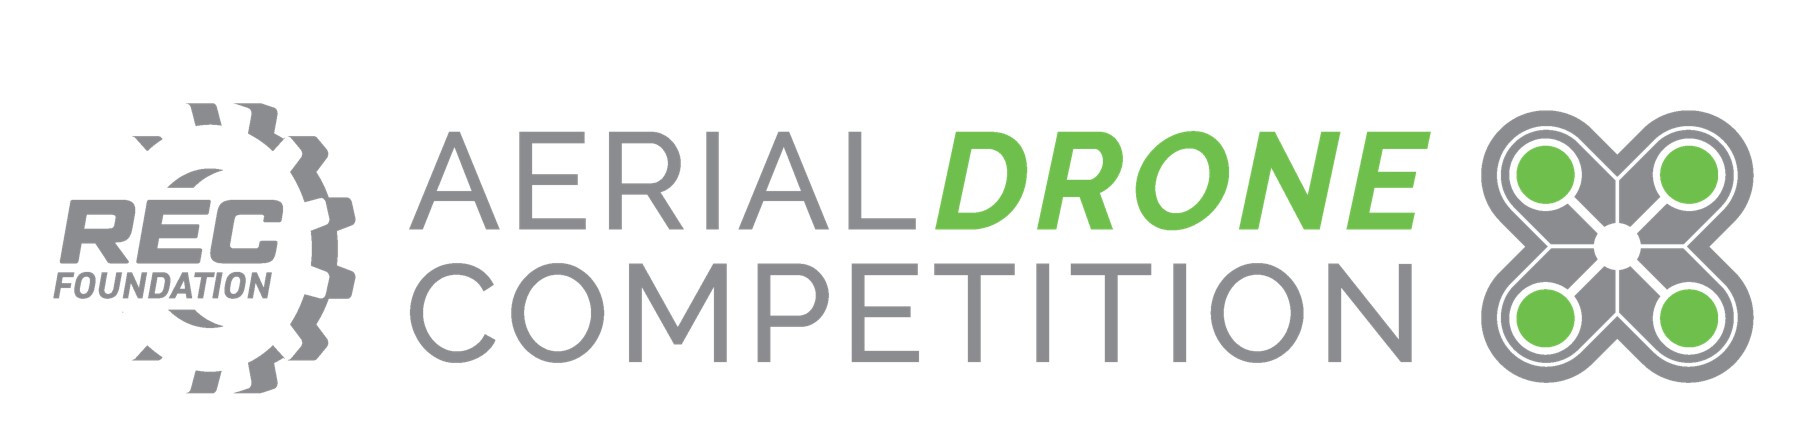 Aerial Drone Competition Judging 101  - Wednesday 10/26 - 7:15 pm Central Time - Hosted by the REC Foundation